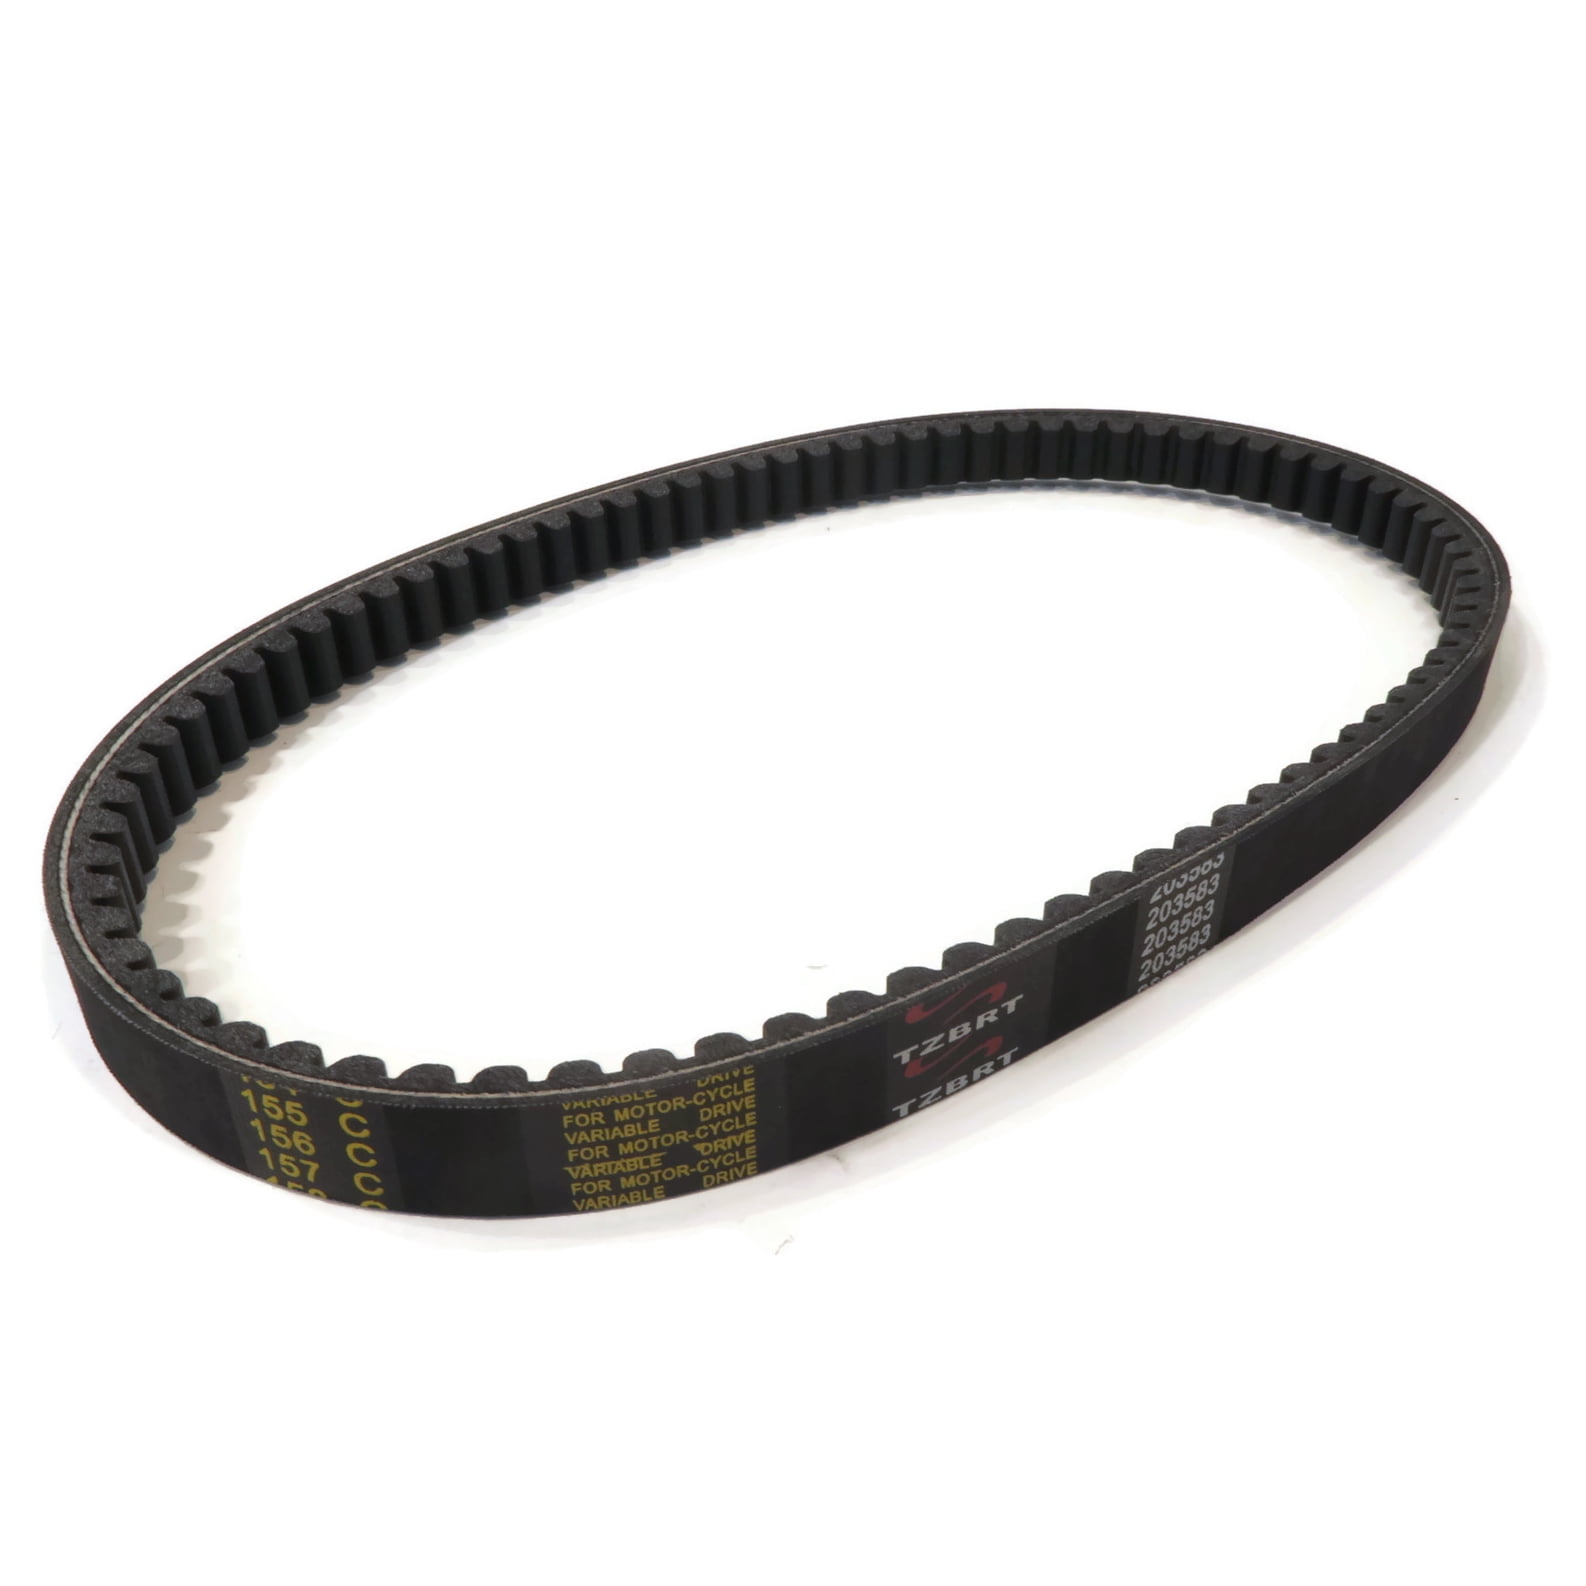 New TORQUE CONVERTER replaces Rotary 13052 Cogged Go Kart/Go Cart DRIVE BELT by The ROP Shop 